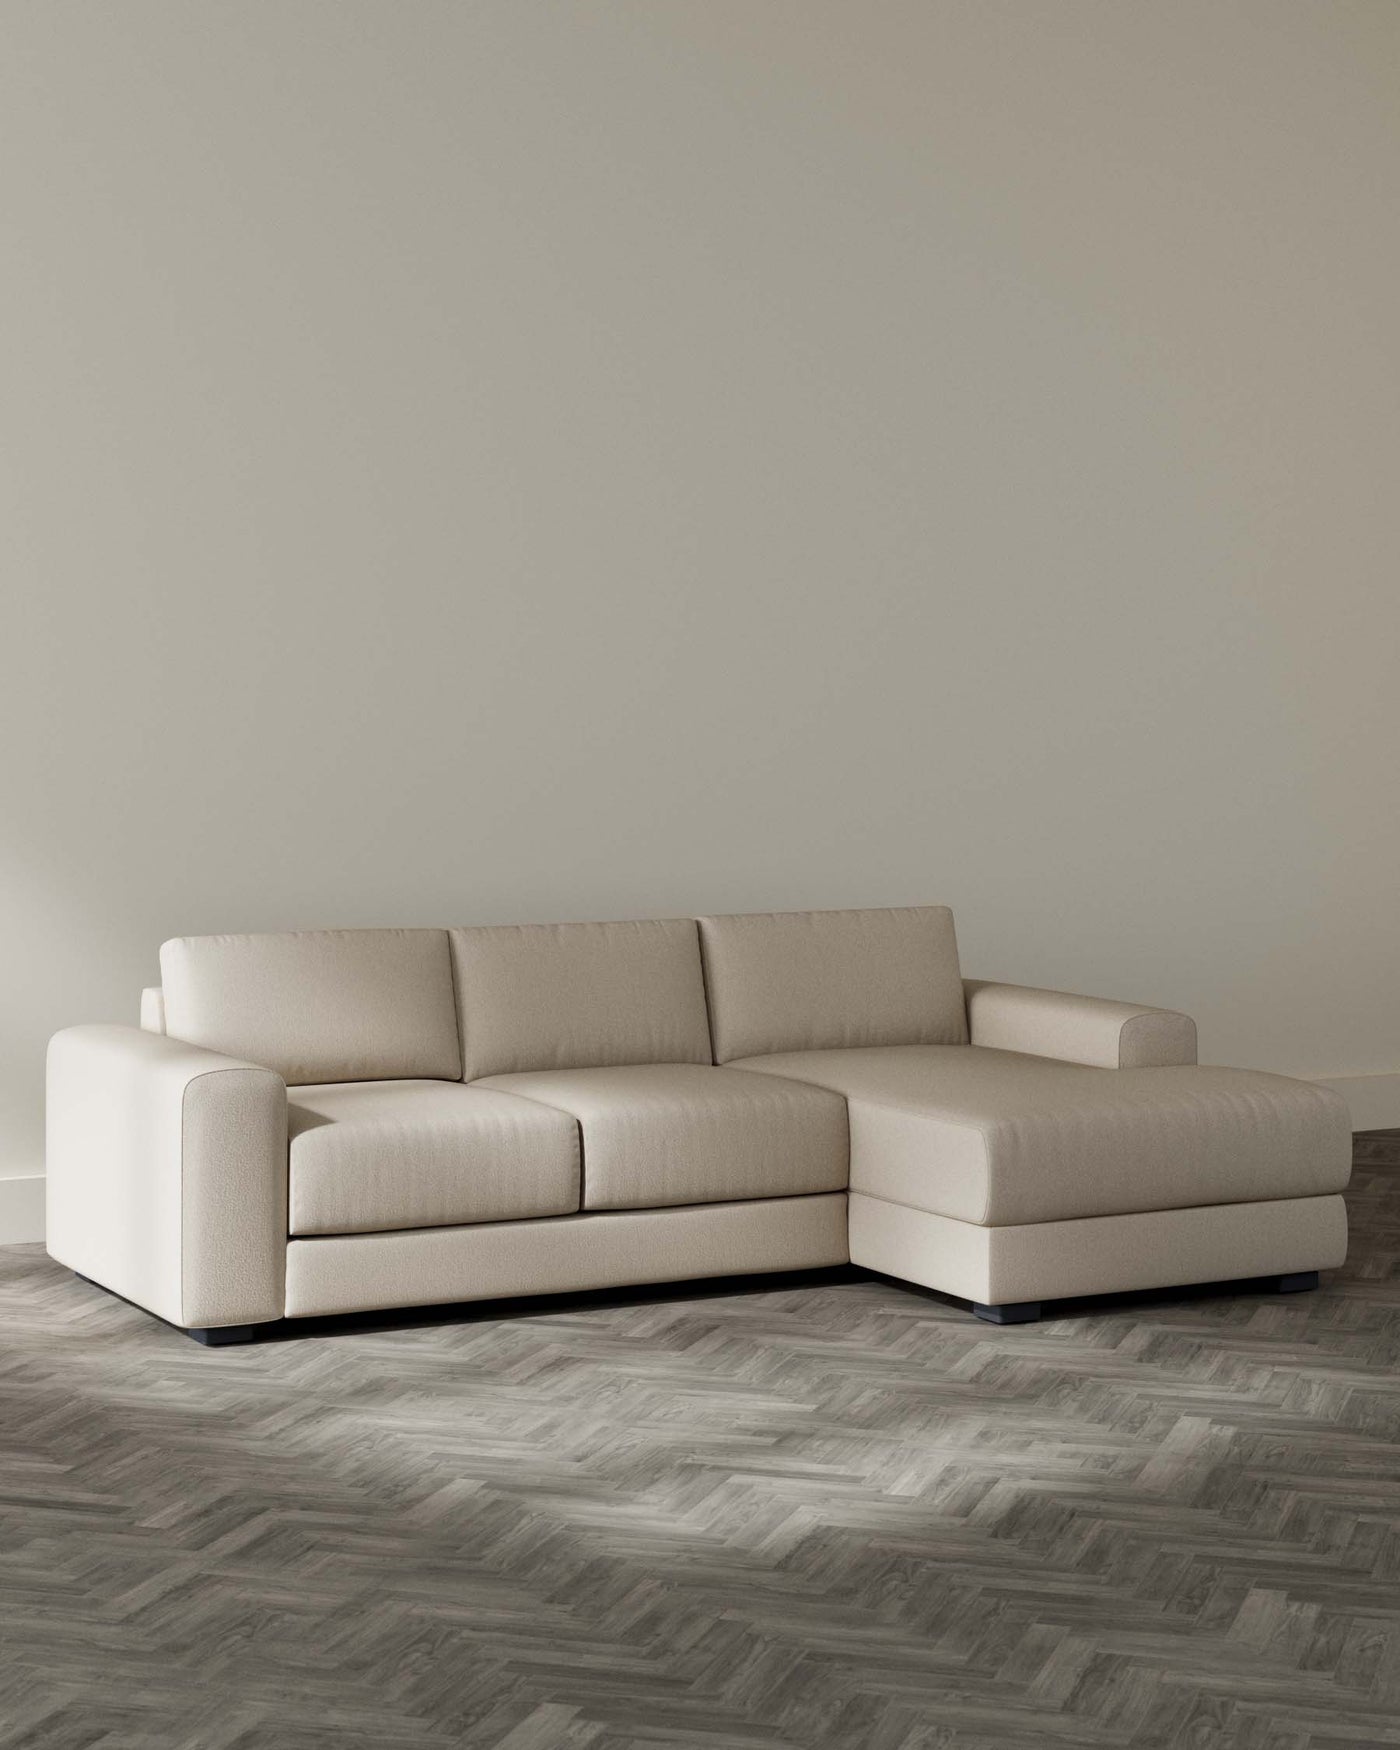 Contemporary beige upholstered L-shaped sectional sofa with a chaise lounge, featuring clean lines and low-profile platform feet, set in a minimalist room with grey herringbone wood flooring and neutral walls.